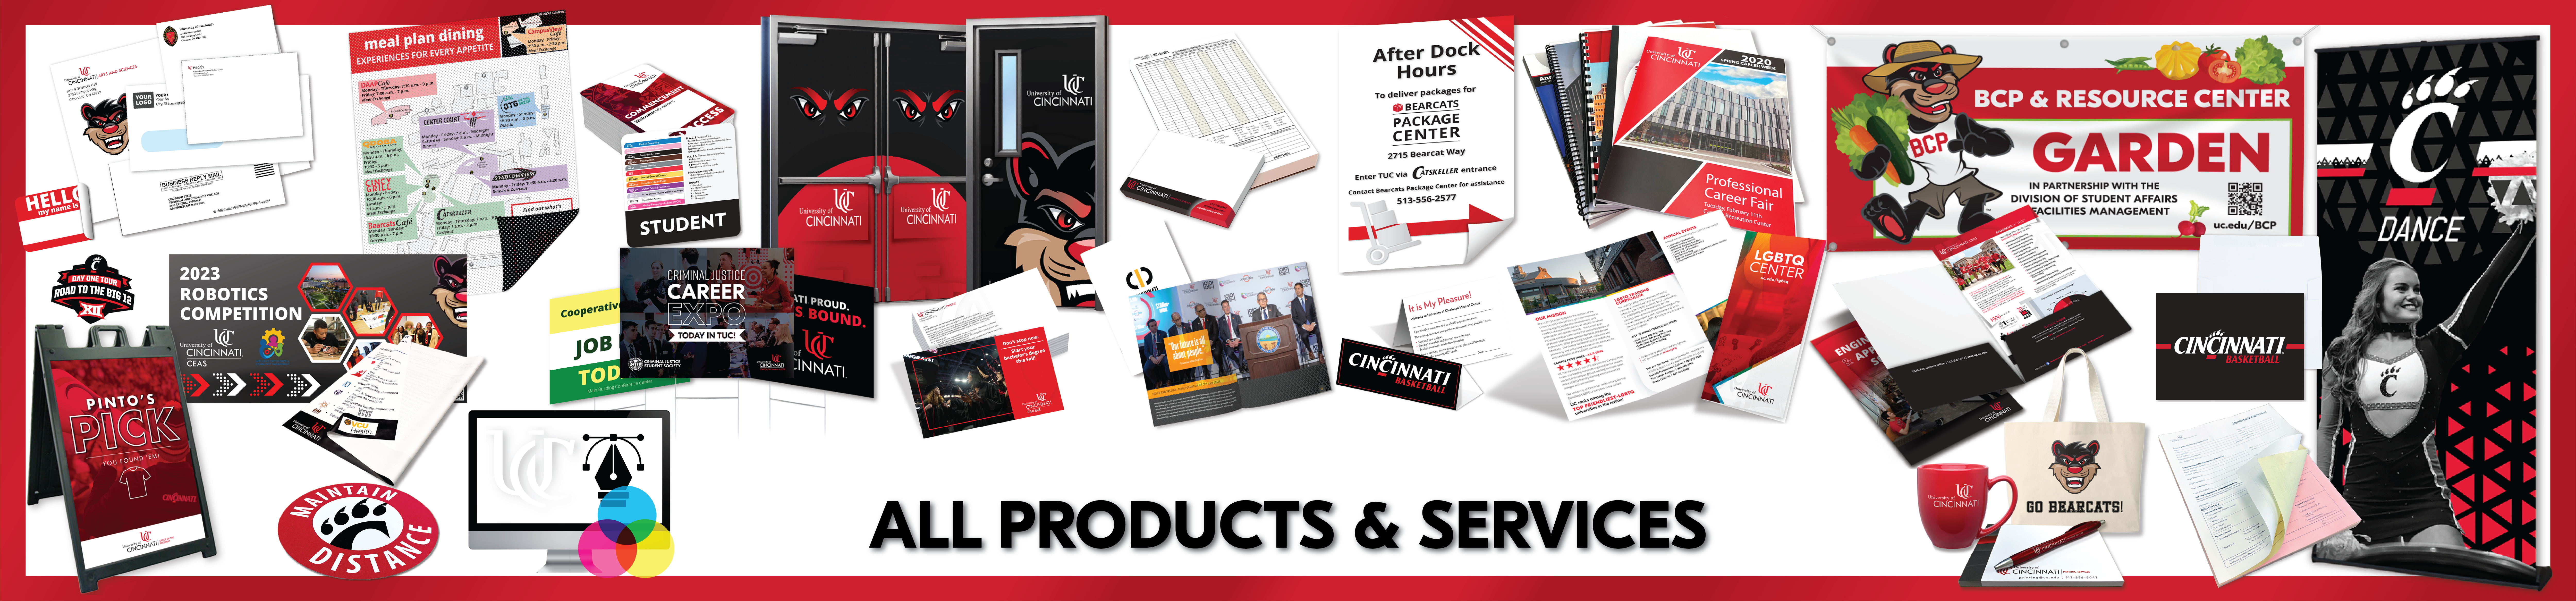 All Products and Services